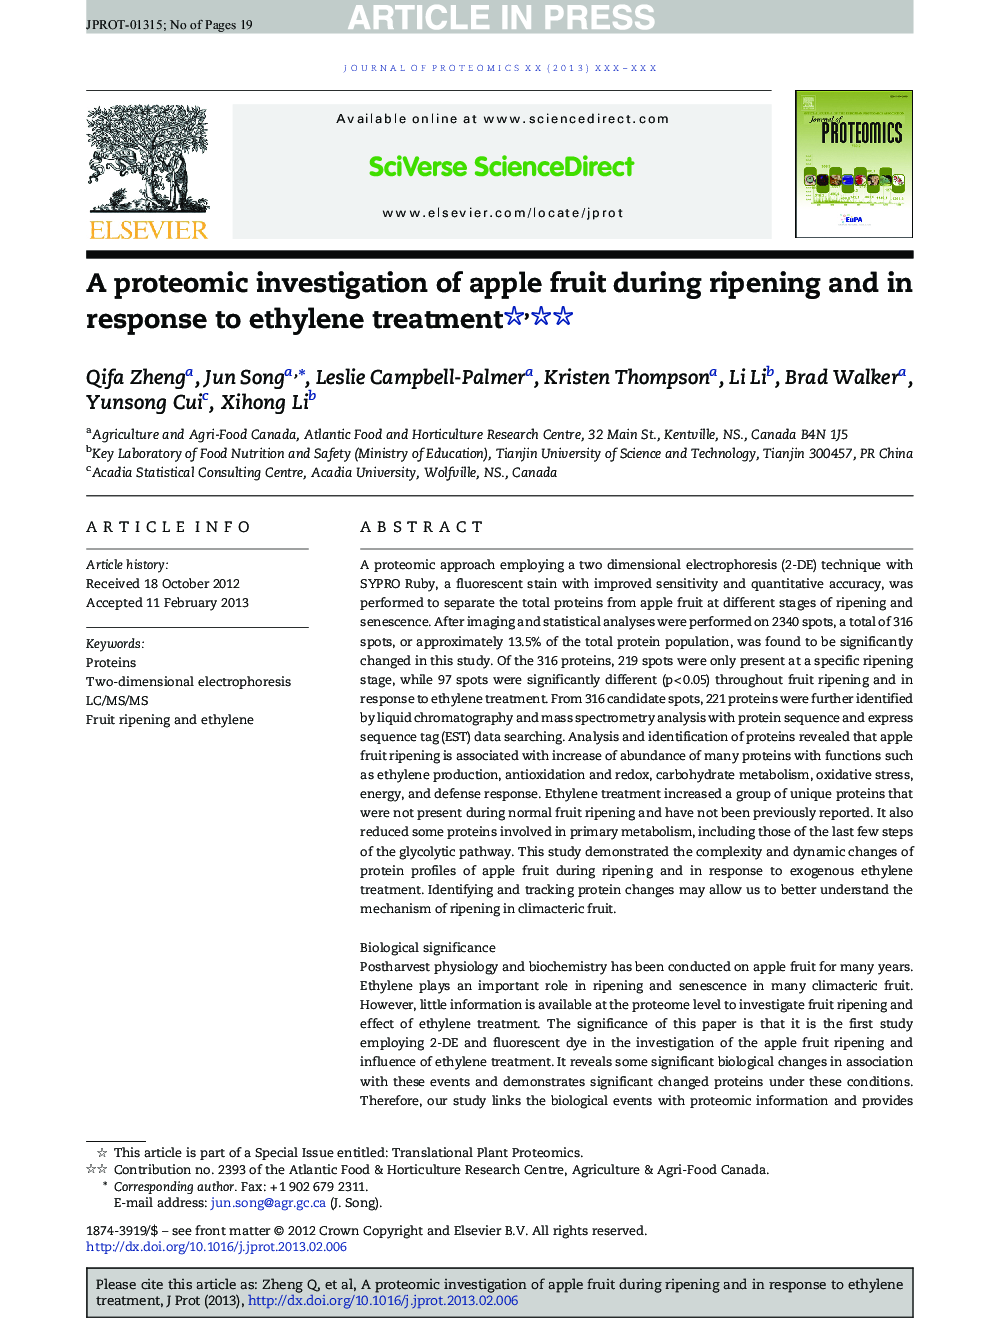 A proteomic investigation of apple fruit during ripening and in response to ethylene treatment